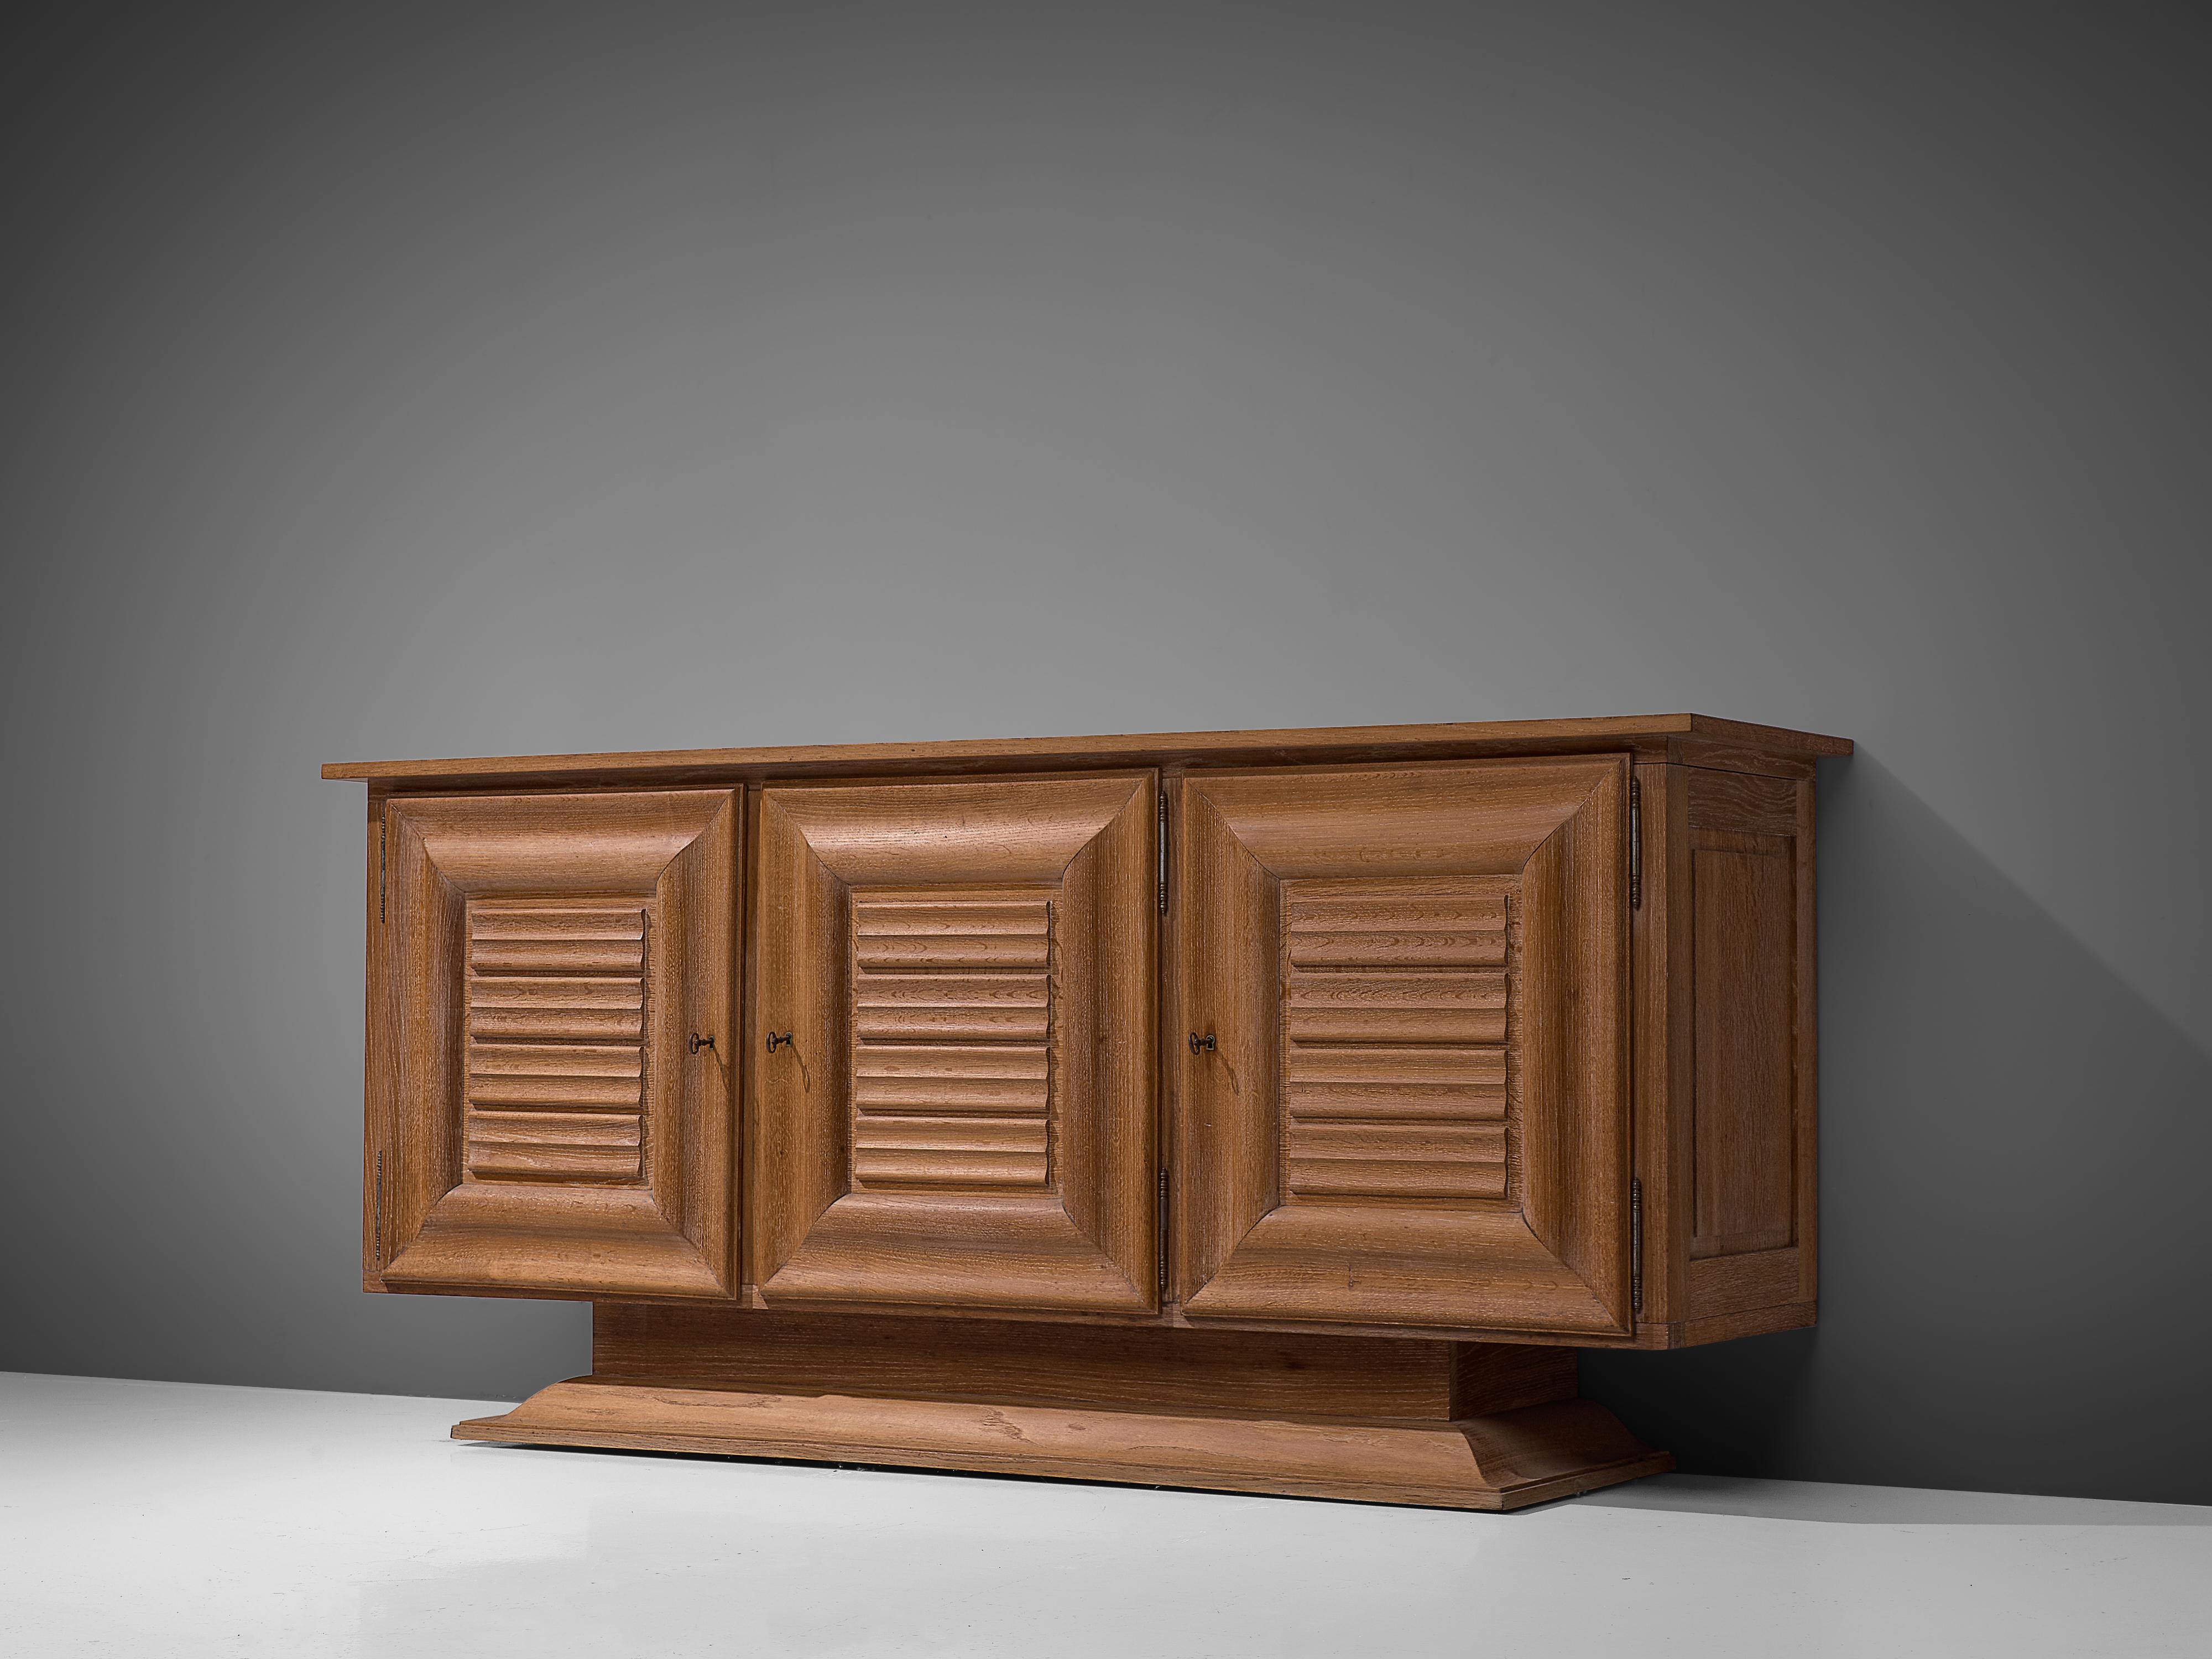 Credenza, oak, metal, France, 1940s. 

This charming sideboard undoubtedly breathes the Late Art Deco Period of the 1940s. Excellent craftsmanship is combined with a well-balanced eye for the composition of functional and decorative elements. The